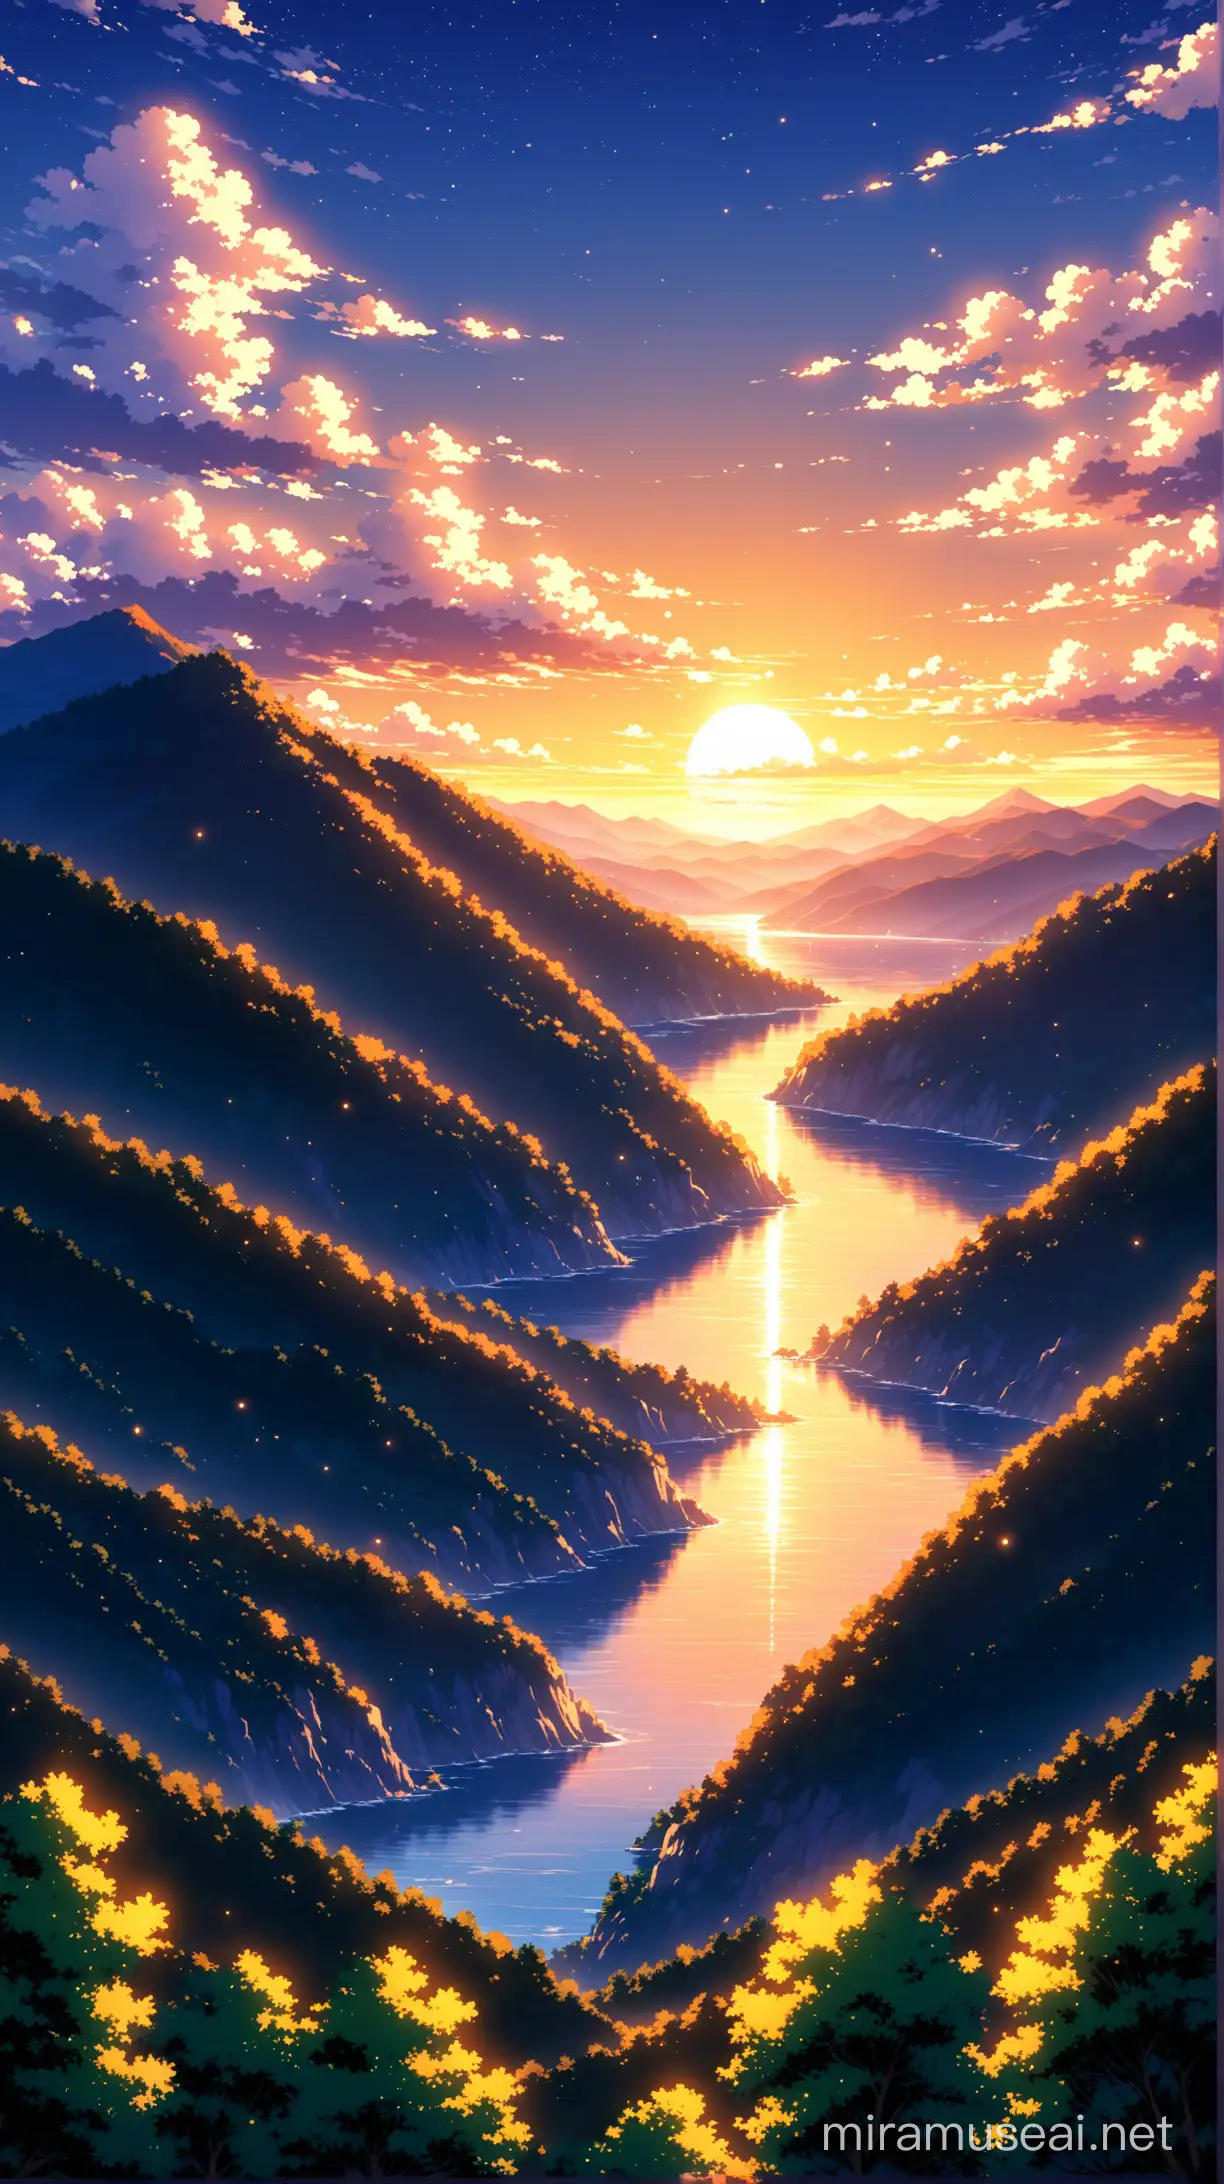 Anime evening with beautiful scenery